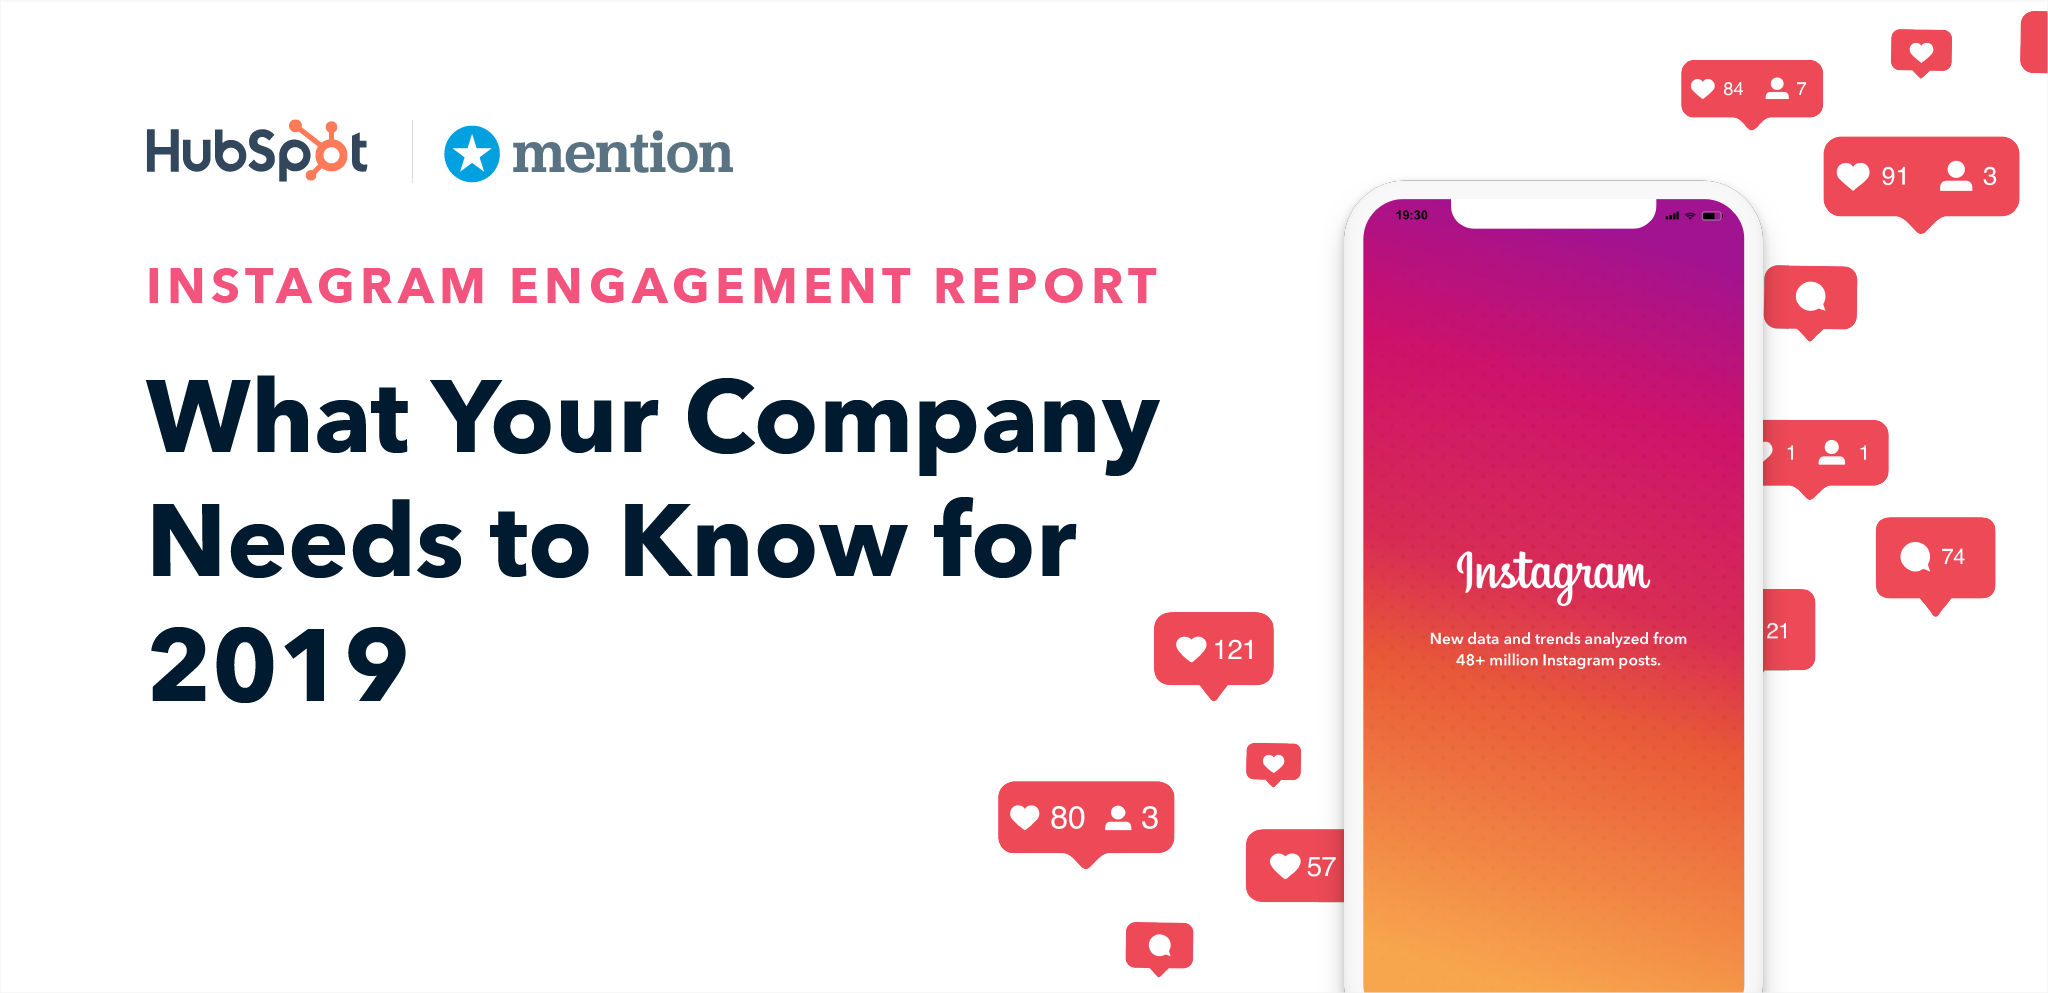 instagram engagement report what your company needs to know for 2019 - instagra!   m engagement report 2019 data insights trends collected